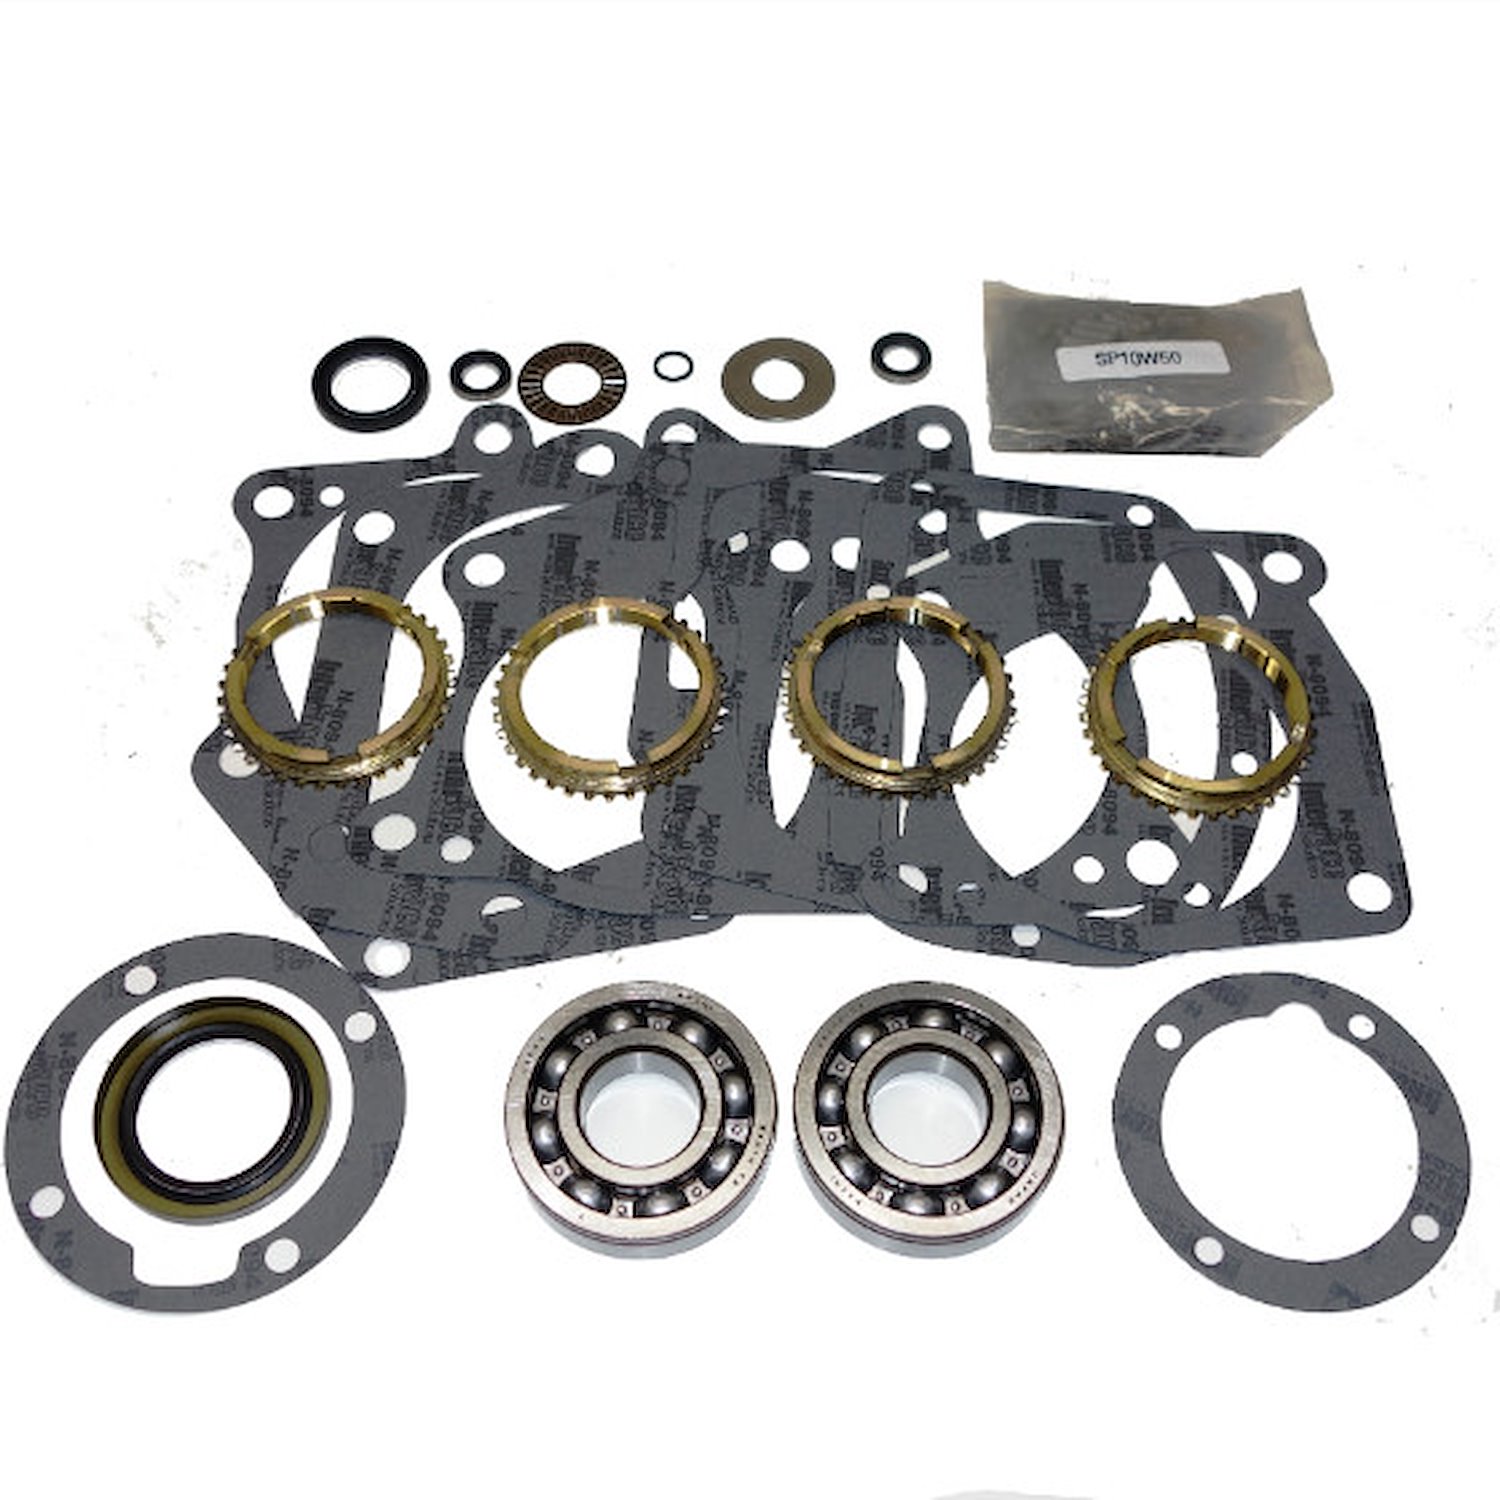 USA Standard 76887 Manual Transmission T10 Bearing Kit, 1960-1967 4-Spd With Synchro'S